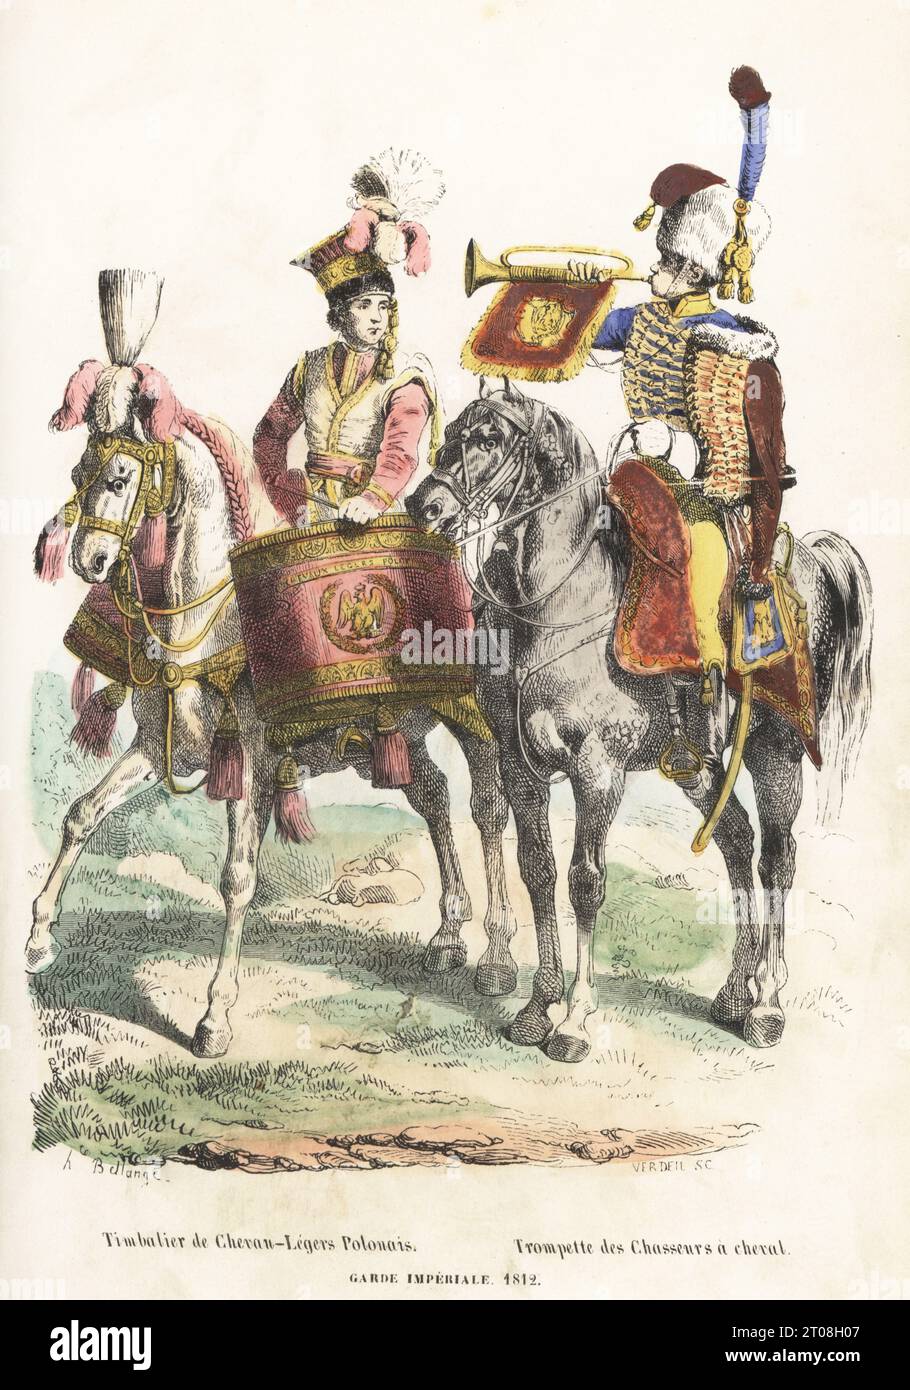 Musicians of the French Imperial Guard cavalry, 1812. Kettledrummer of the 1st Polish Light Cavalry Lancers and trumpeter of the Horse Chasseurs. Timbalier de Chevau-Legers Polonais, Trompette des Chasseurs a cheval, Garde Imperiale 1812. Handcoloured woodcut by Pierre Verdeil after an illustration by Hippolyte Bellangé from P.M. Laurent de l’Ardeche’s Histoire de Napoleon, Paris, 1840. Stock Photo